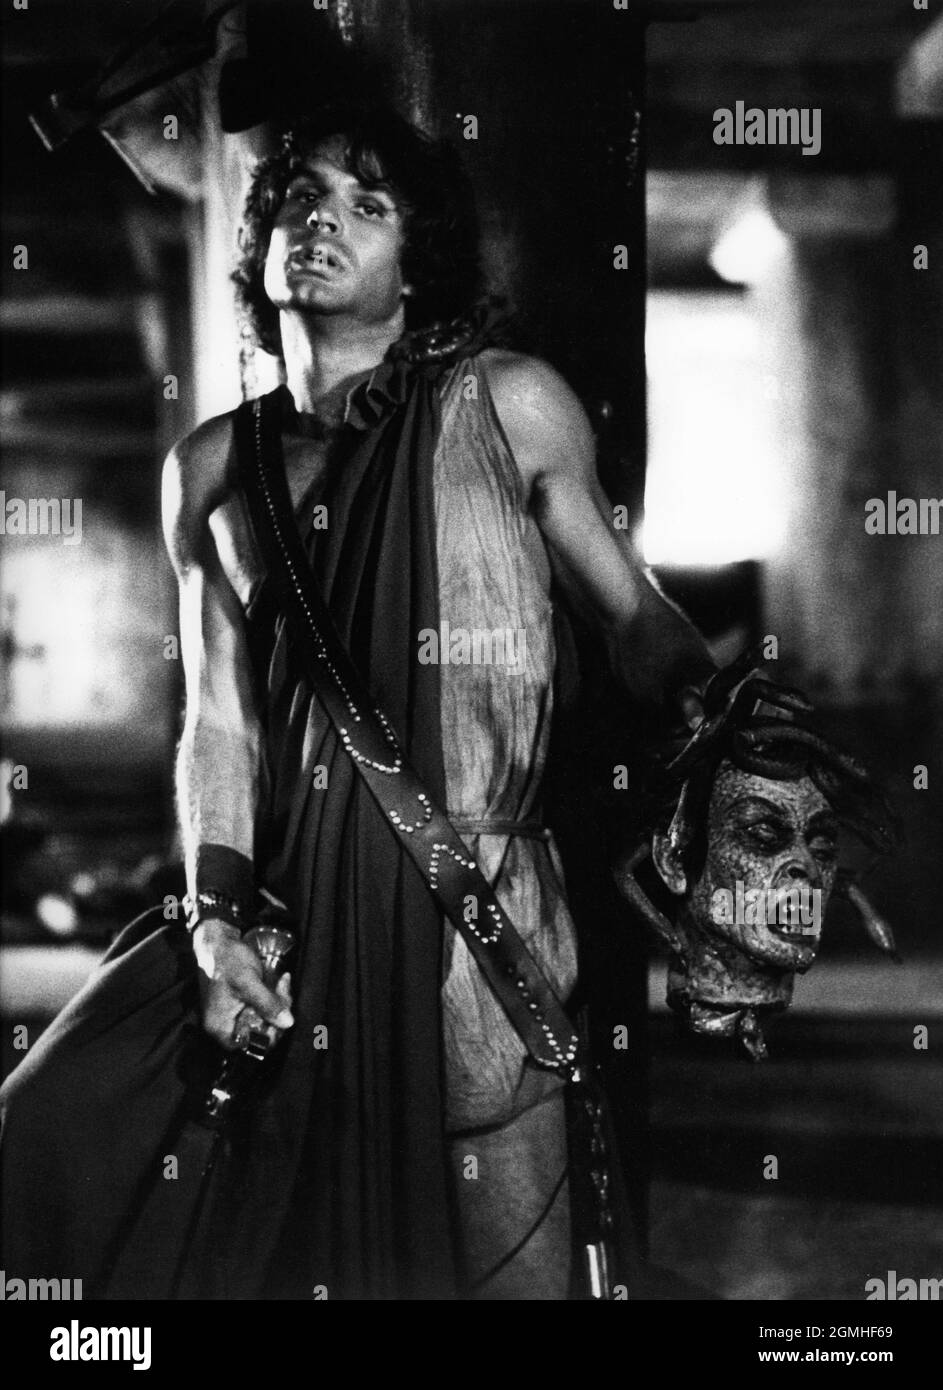 HARRY HAMLIN as Perseus holding the severed head of Medusa the Gorgon in CLASH OF THE TITANS 1981 director DESMOND DAVIS written by Beverley Cross costume design Emma Porteous creator of special visual effects (Dynamation) Ray Harryhausen music Laurence Rosenthal producers Charles H. Schneer and Ray Harryhausen Charles H. Schneer Productions / Peerford Ltd. / distribution Cinema International Corporation (CIC)  (UK) Metro Goldwyn Mayer (USA) Stock Photo